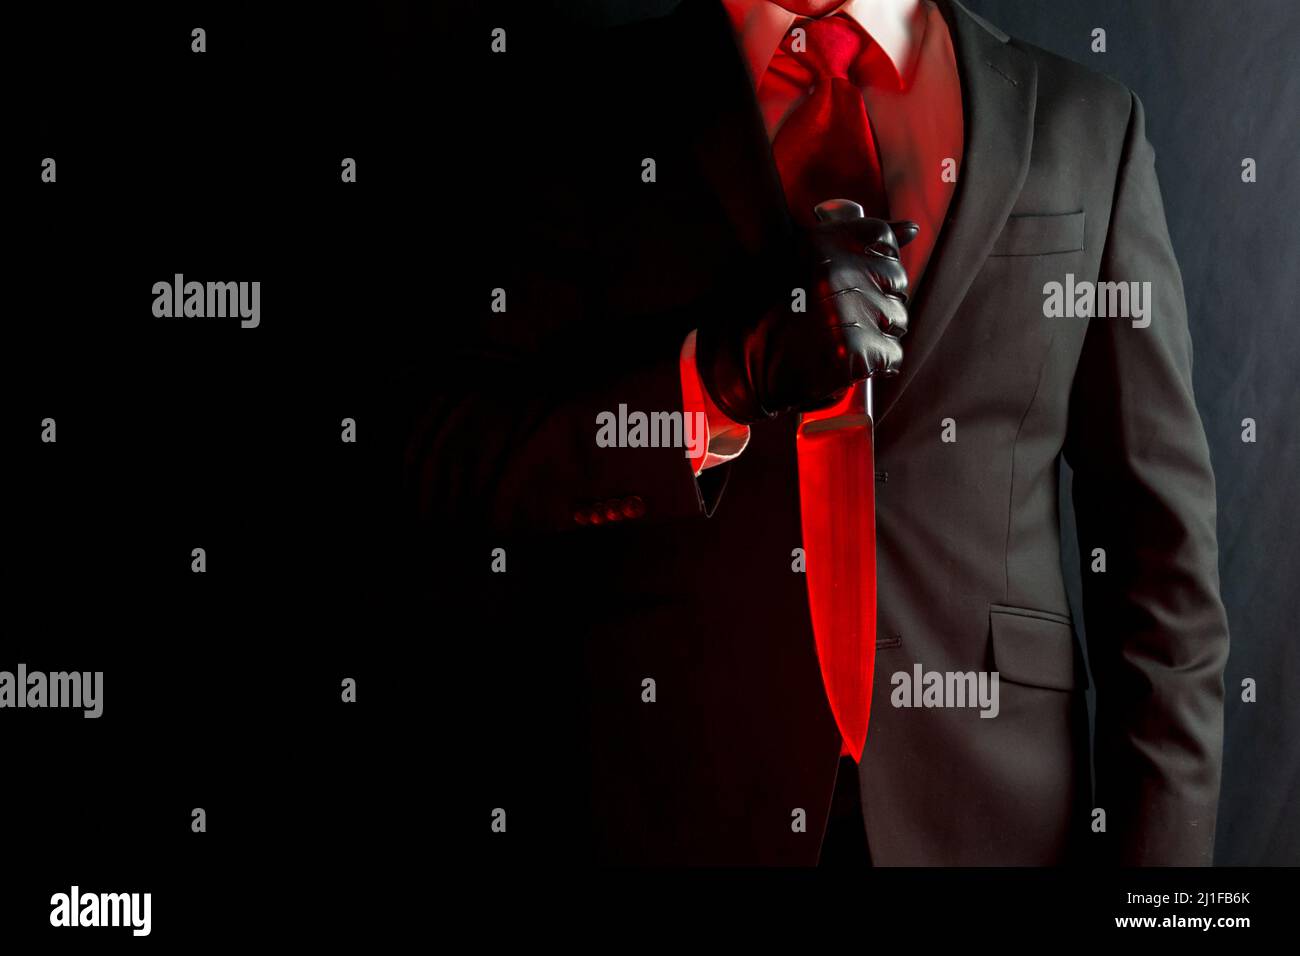 Portrait of Businessman in Dark Suit and Red Tie Holding Sharp Knife. Stylish Assassin and Horror Film Killer. Stock Photo